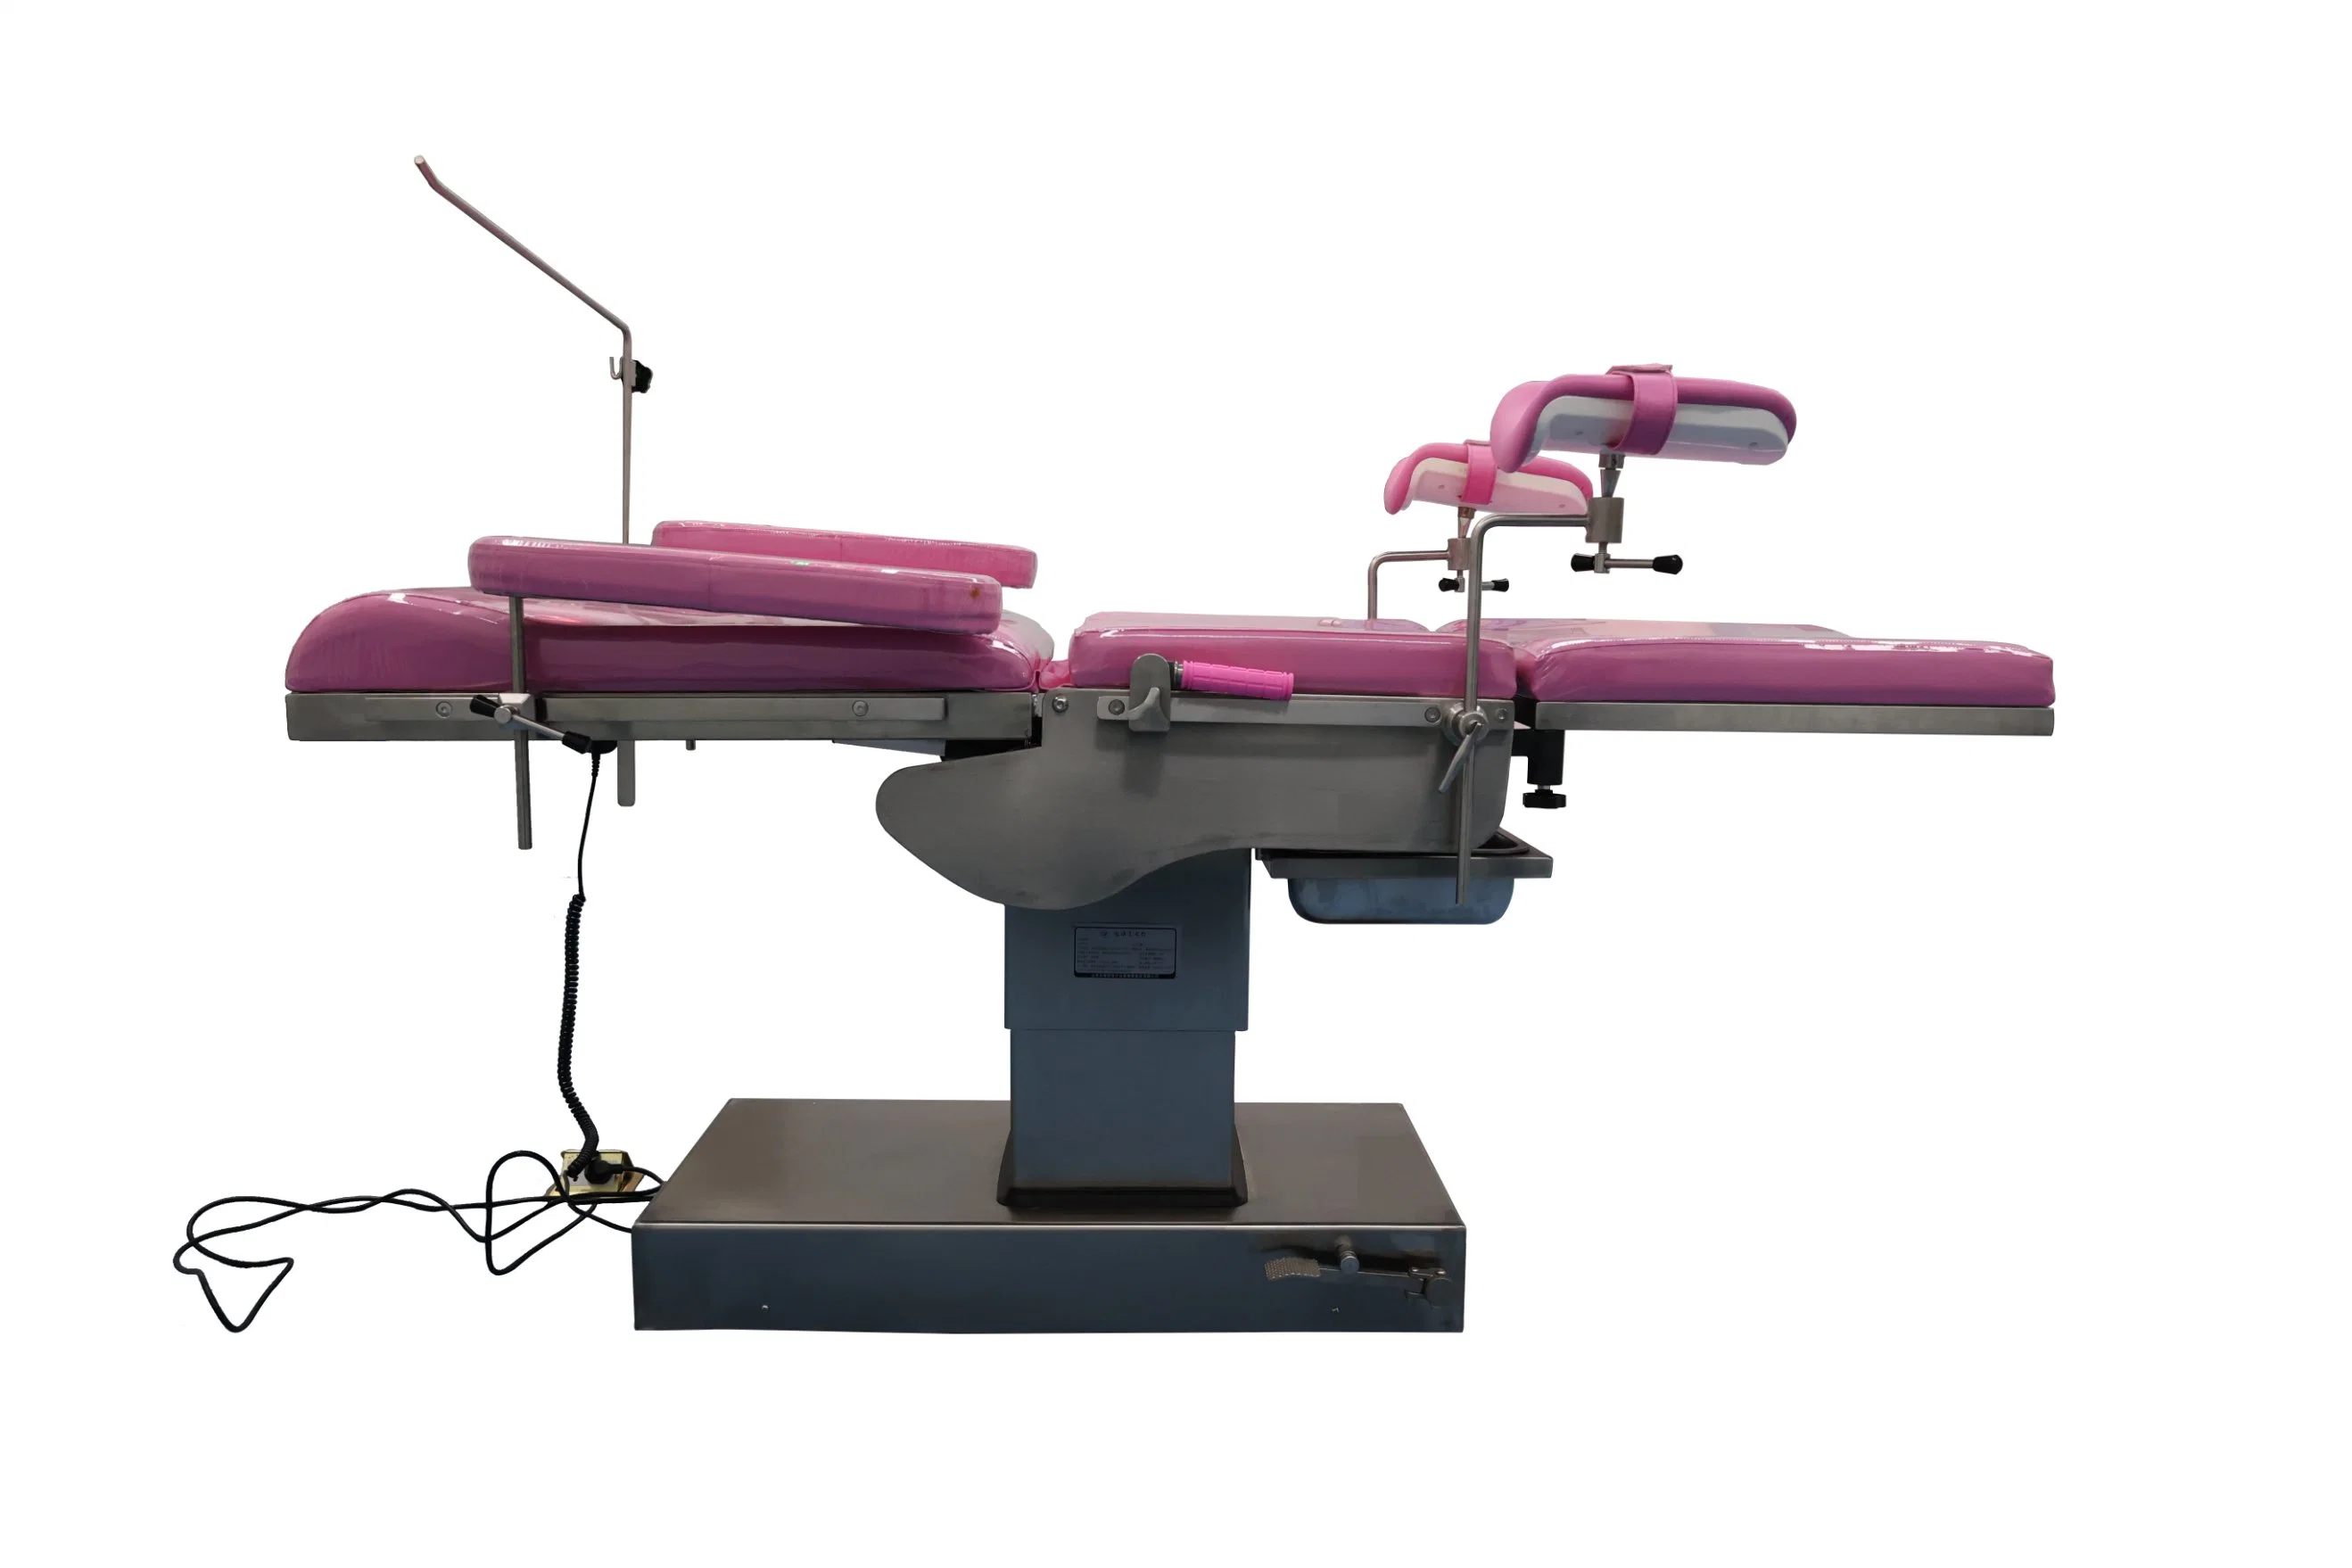 China Manufacturer Hospital Electric Gynecology Operating Delivery Bed Examination Table (стол